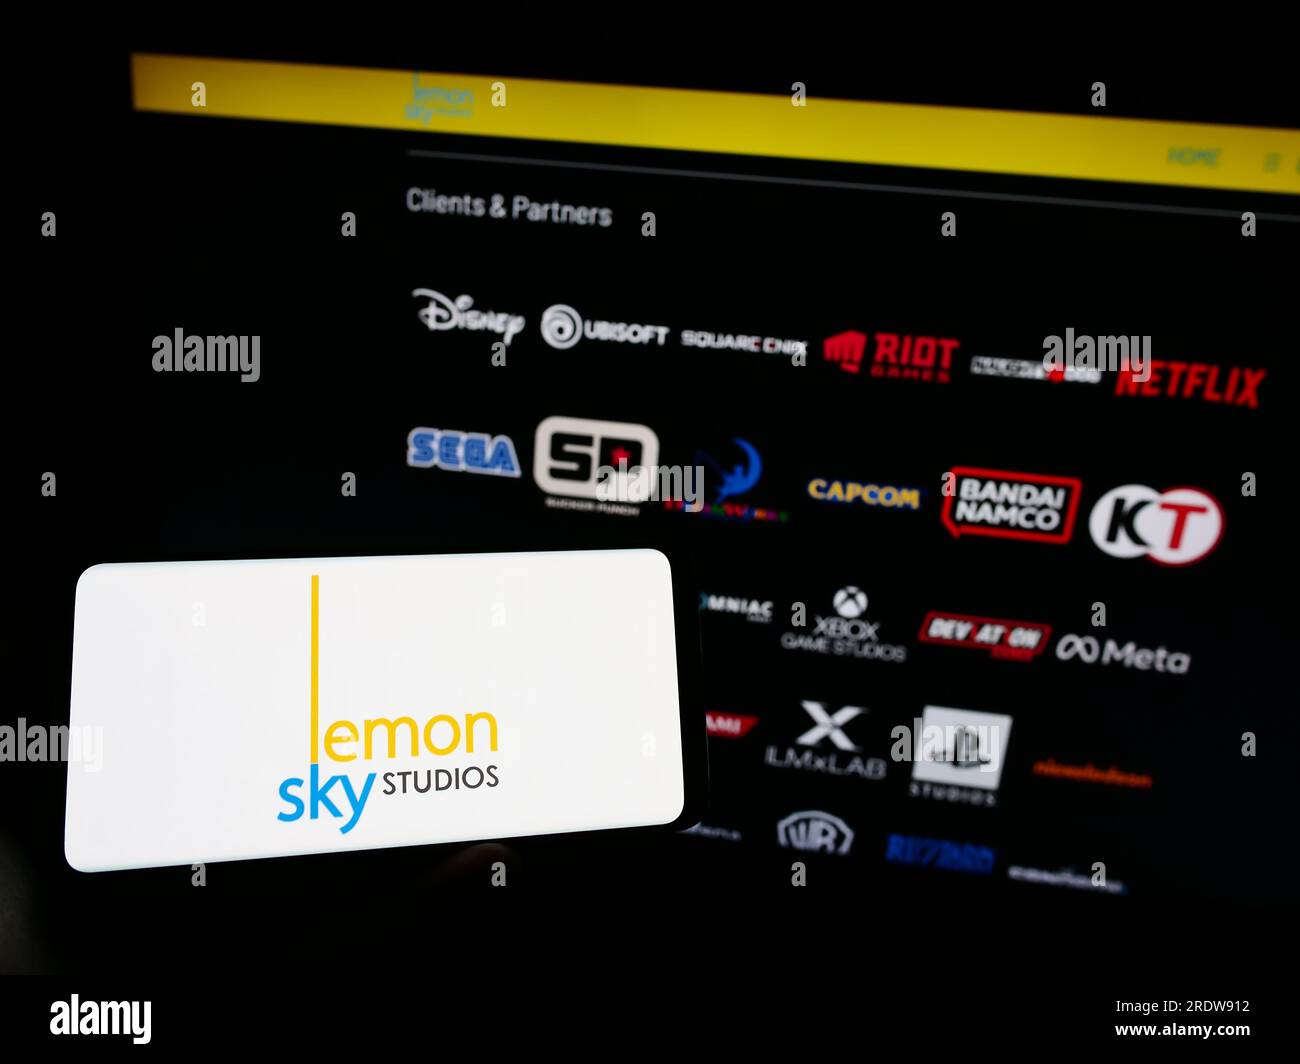 Person holding mobile phone with logo of Malaysian video games company Lemon Sky Studios on screen in front of web page. Focus on phone display. Stock Photo